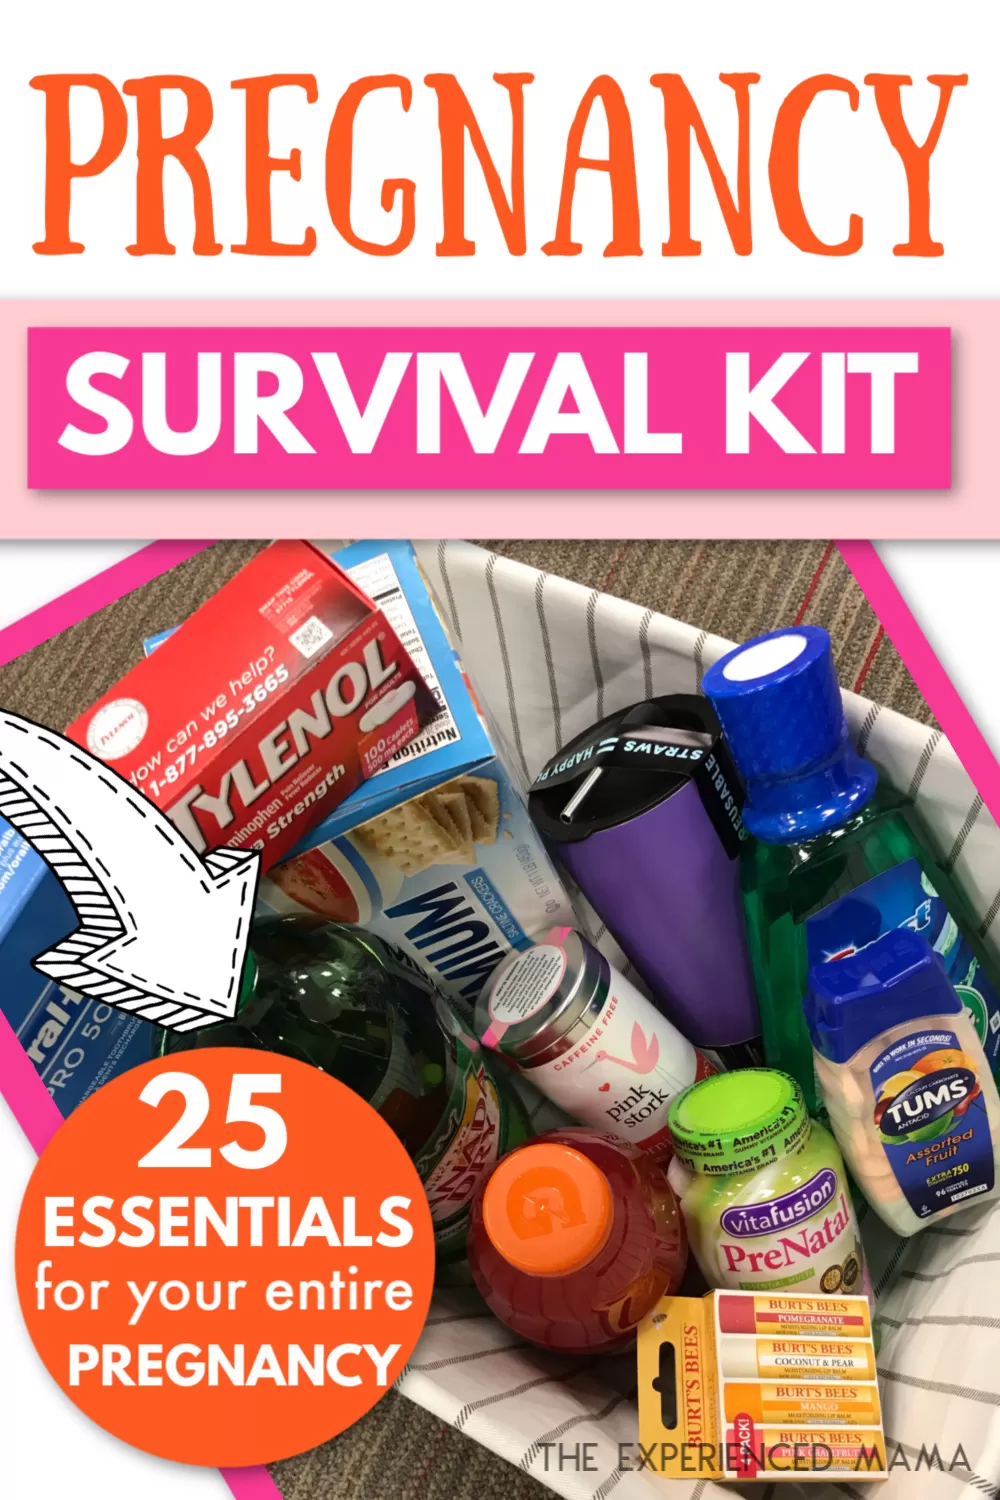 basket with pregnancy-related items and text overlay "pregnancy survival kit - 25 essentials for your entire pregnancy"